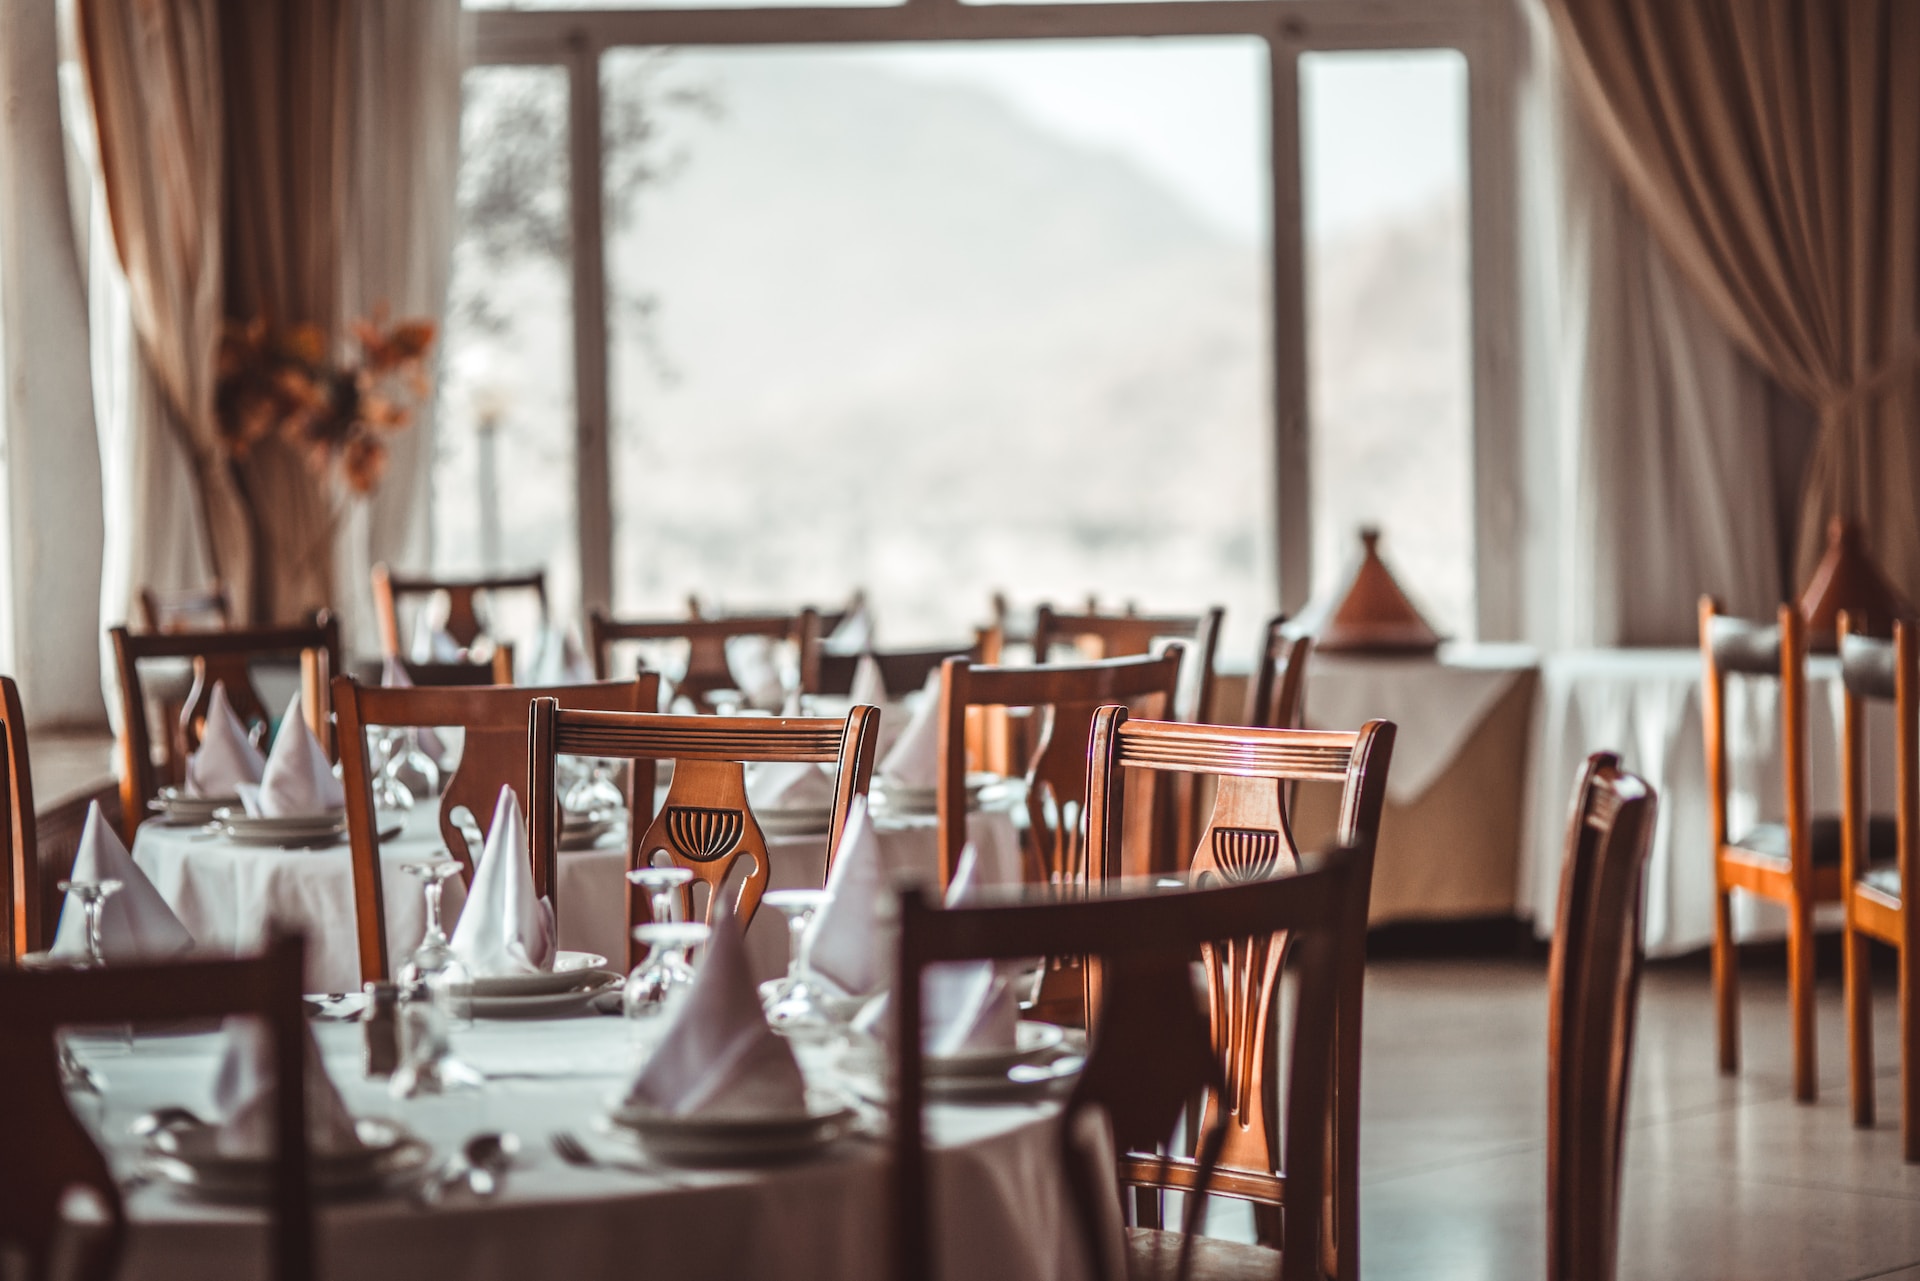 The Importance of Cleanliness in Restaurant Settings